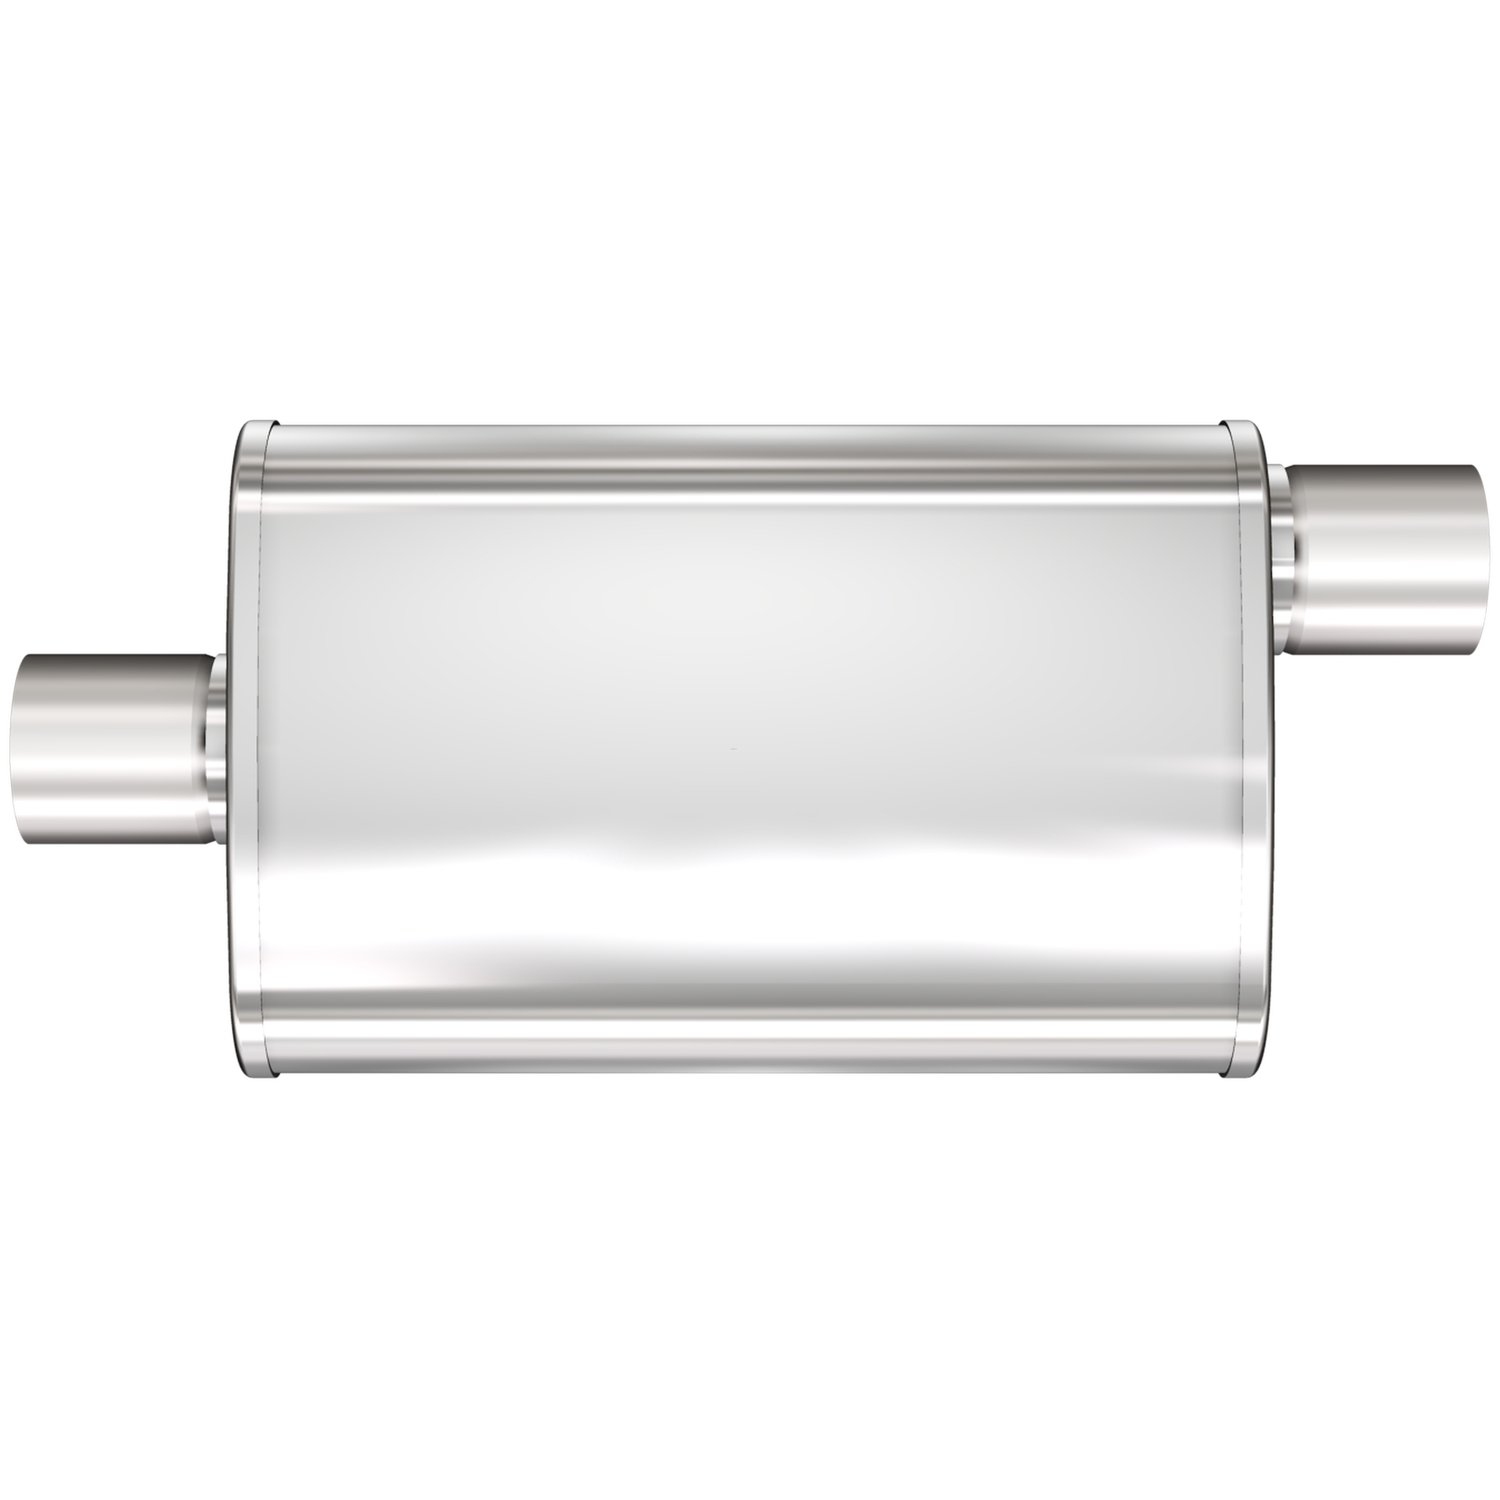 4" x 9" Oval XL 3-Chamber Muffler Center In/Offset Out: 2.5"/2.5" Body Length: 14" Overall Length: 20" Satin Finish